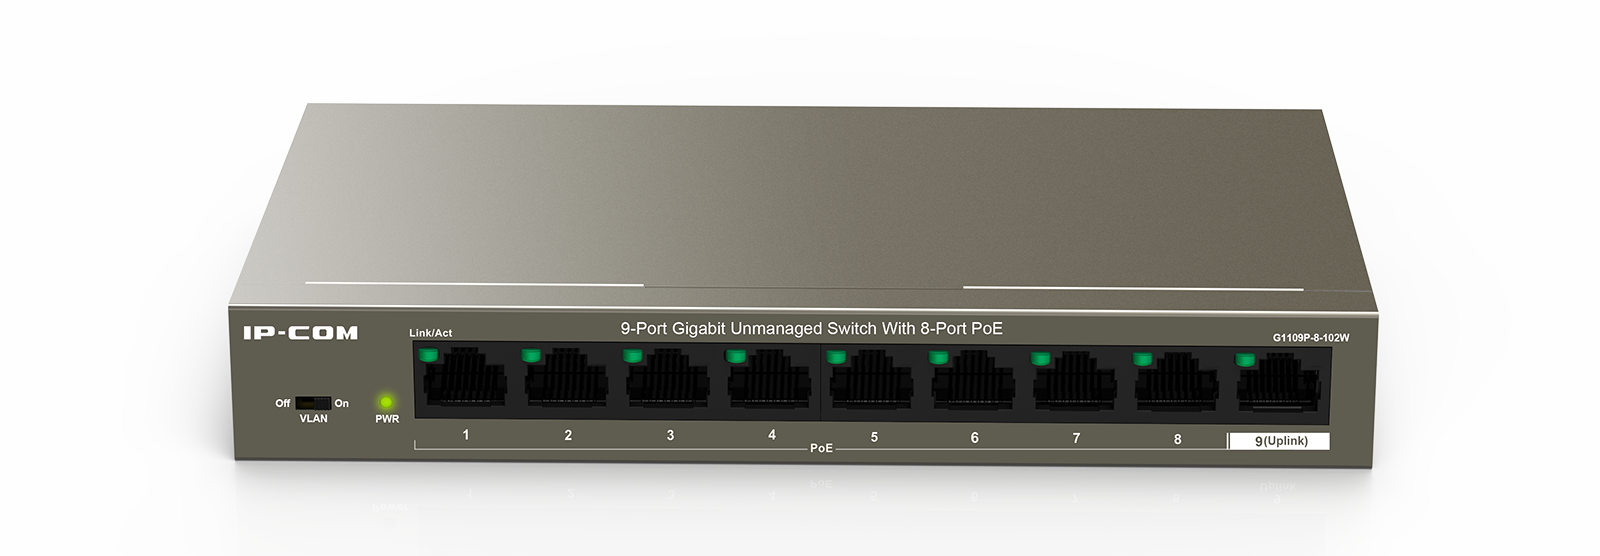 8 Port GigE Managed PoE Switch - Configurable 802.3at or 24V Passive PoE